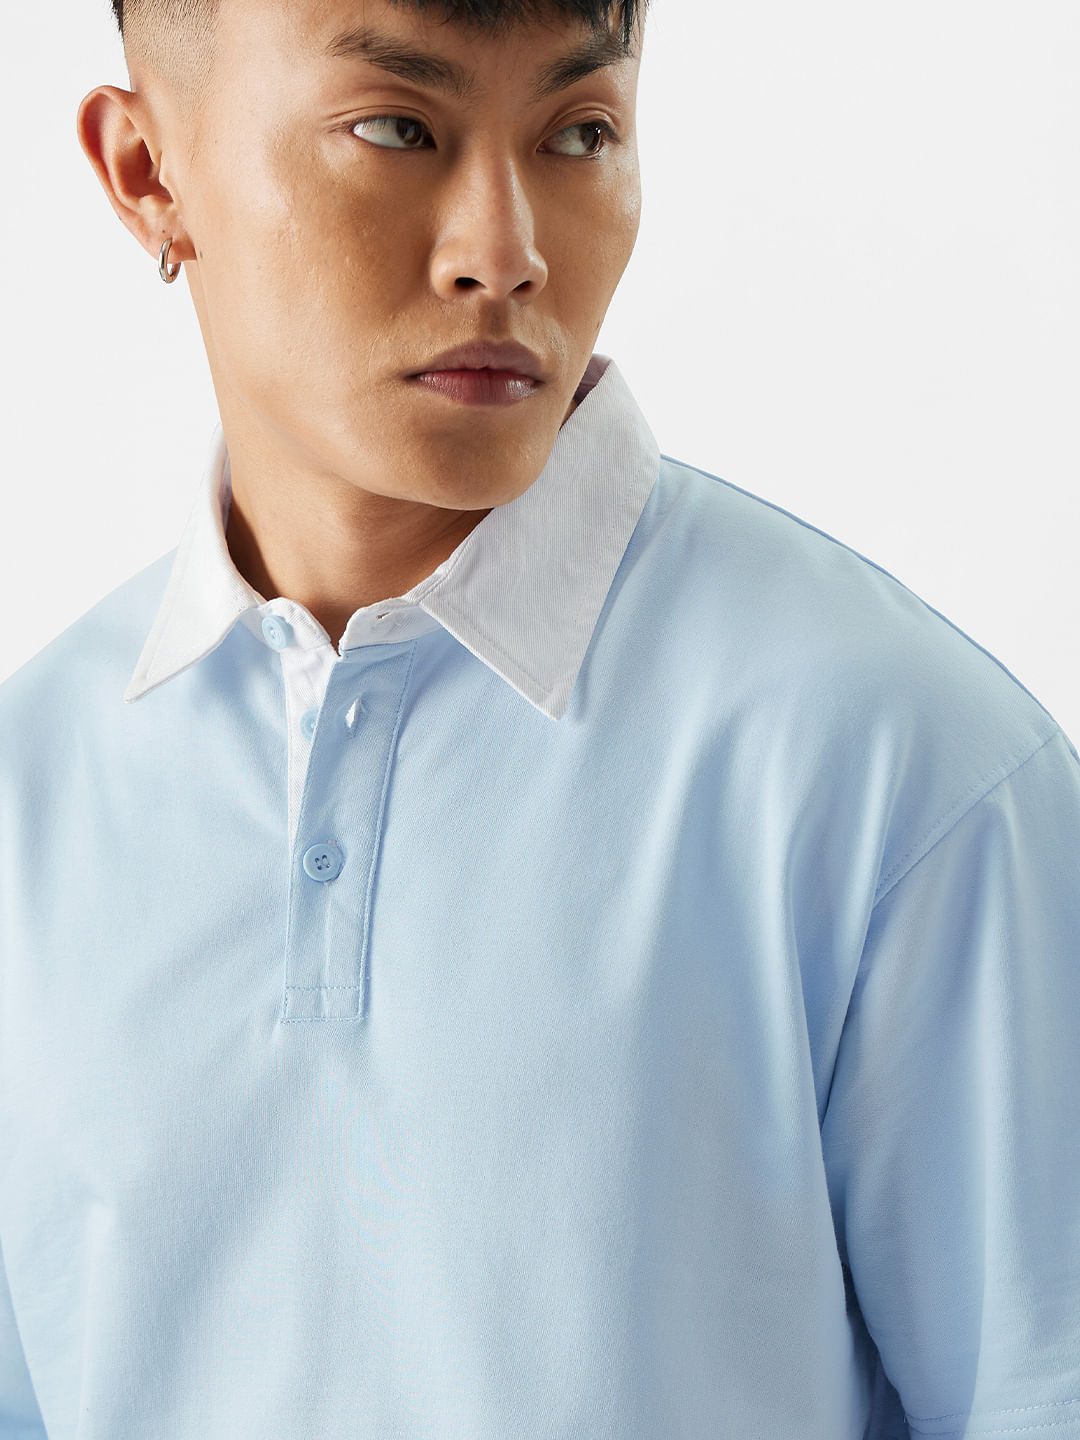 Buy Solid: Powder Blue Men Overized Polos Online